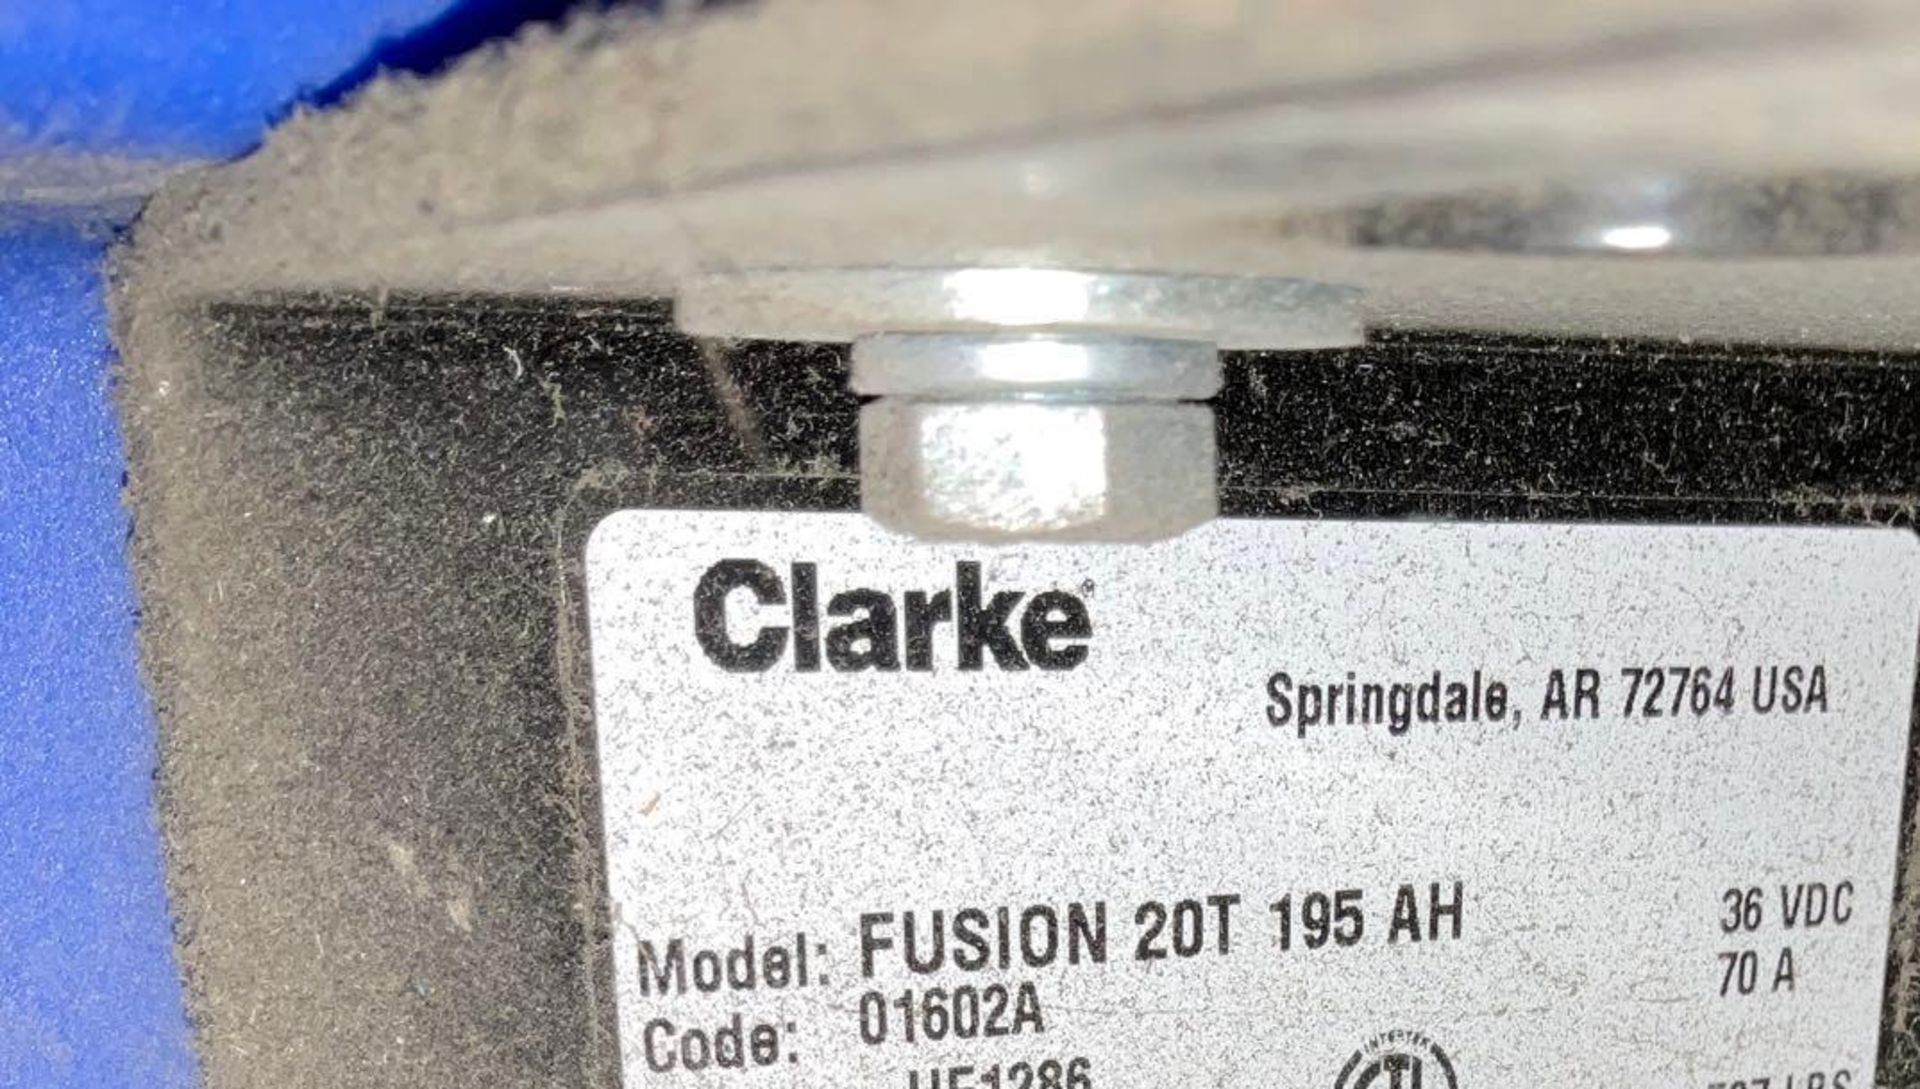 CLARKE WALK BEHIND FLOOR BURNISHER MODEL FUSION 20T 195 AH, ELECTRIC, APPROX 36 VOLTS, NEW BATTERIES - Image 11 of 12